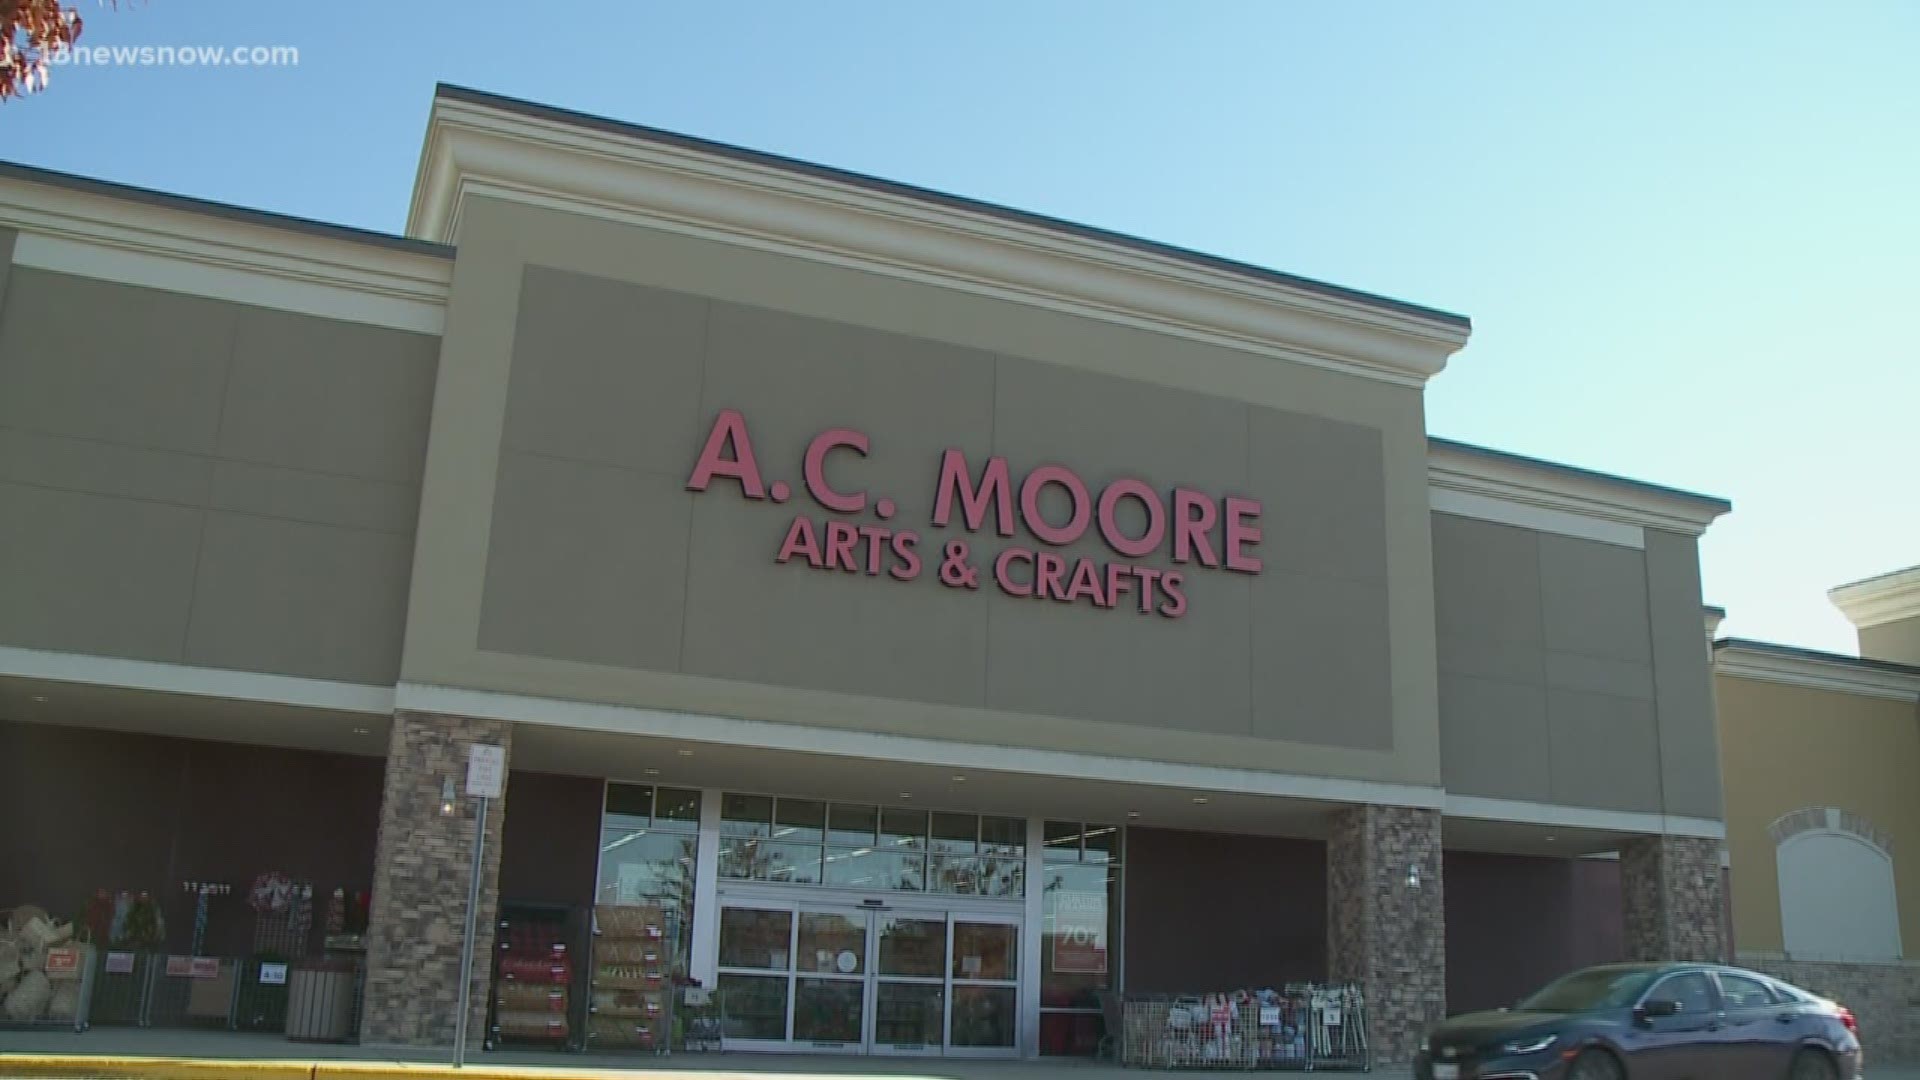 Every year, it seems like more stores are closing doors because of fierce online competition. 
Now there's one more store to add to that list: A.C. Moore.